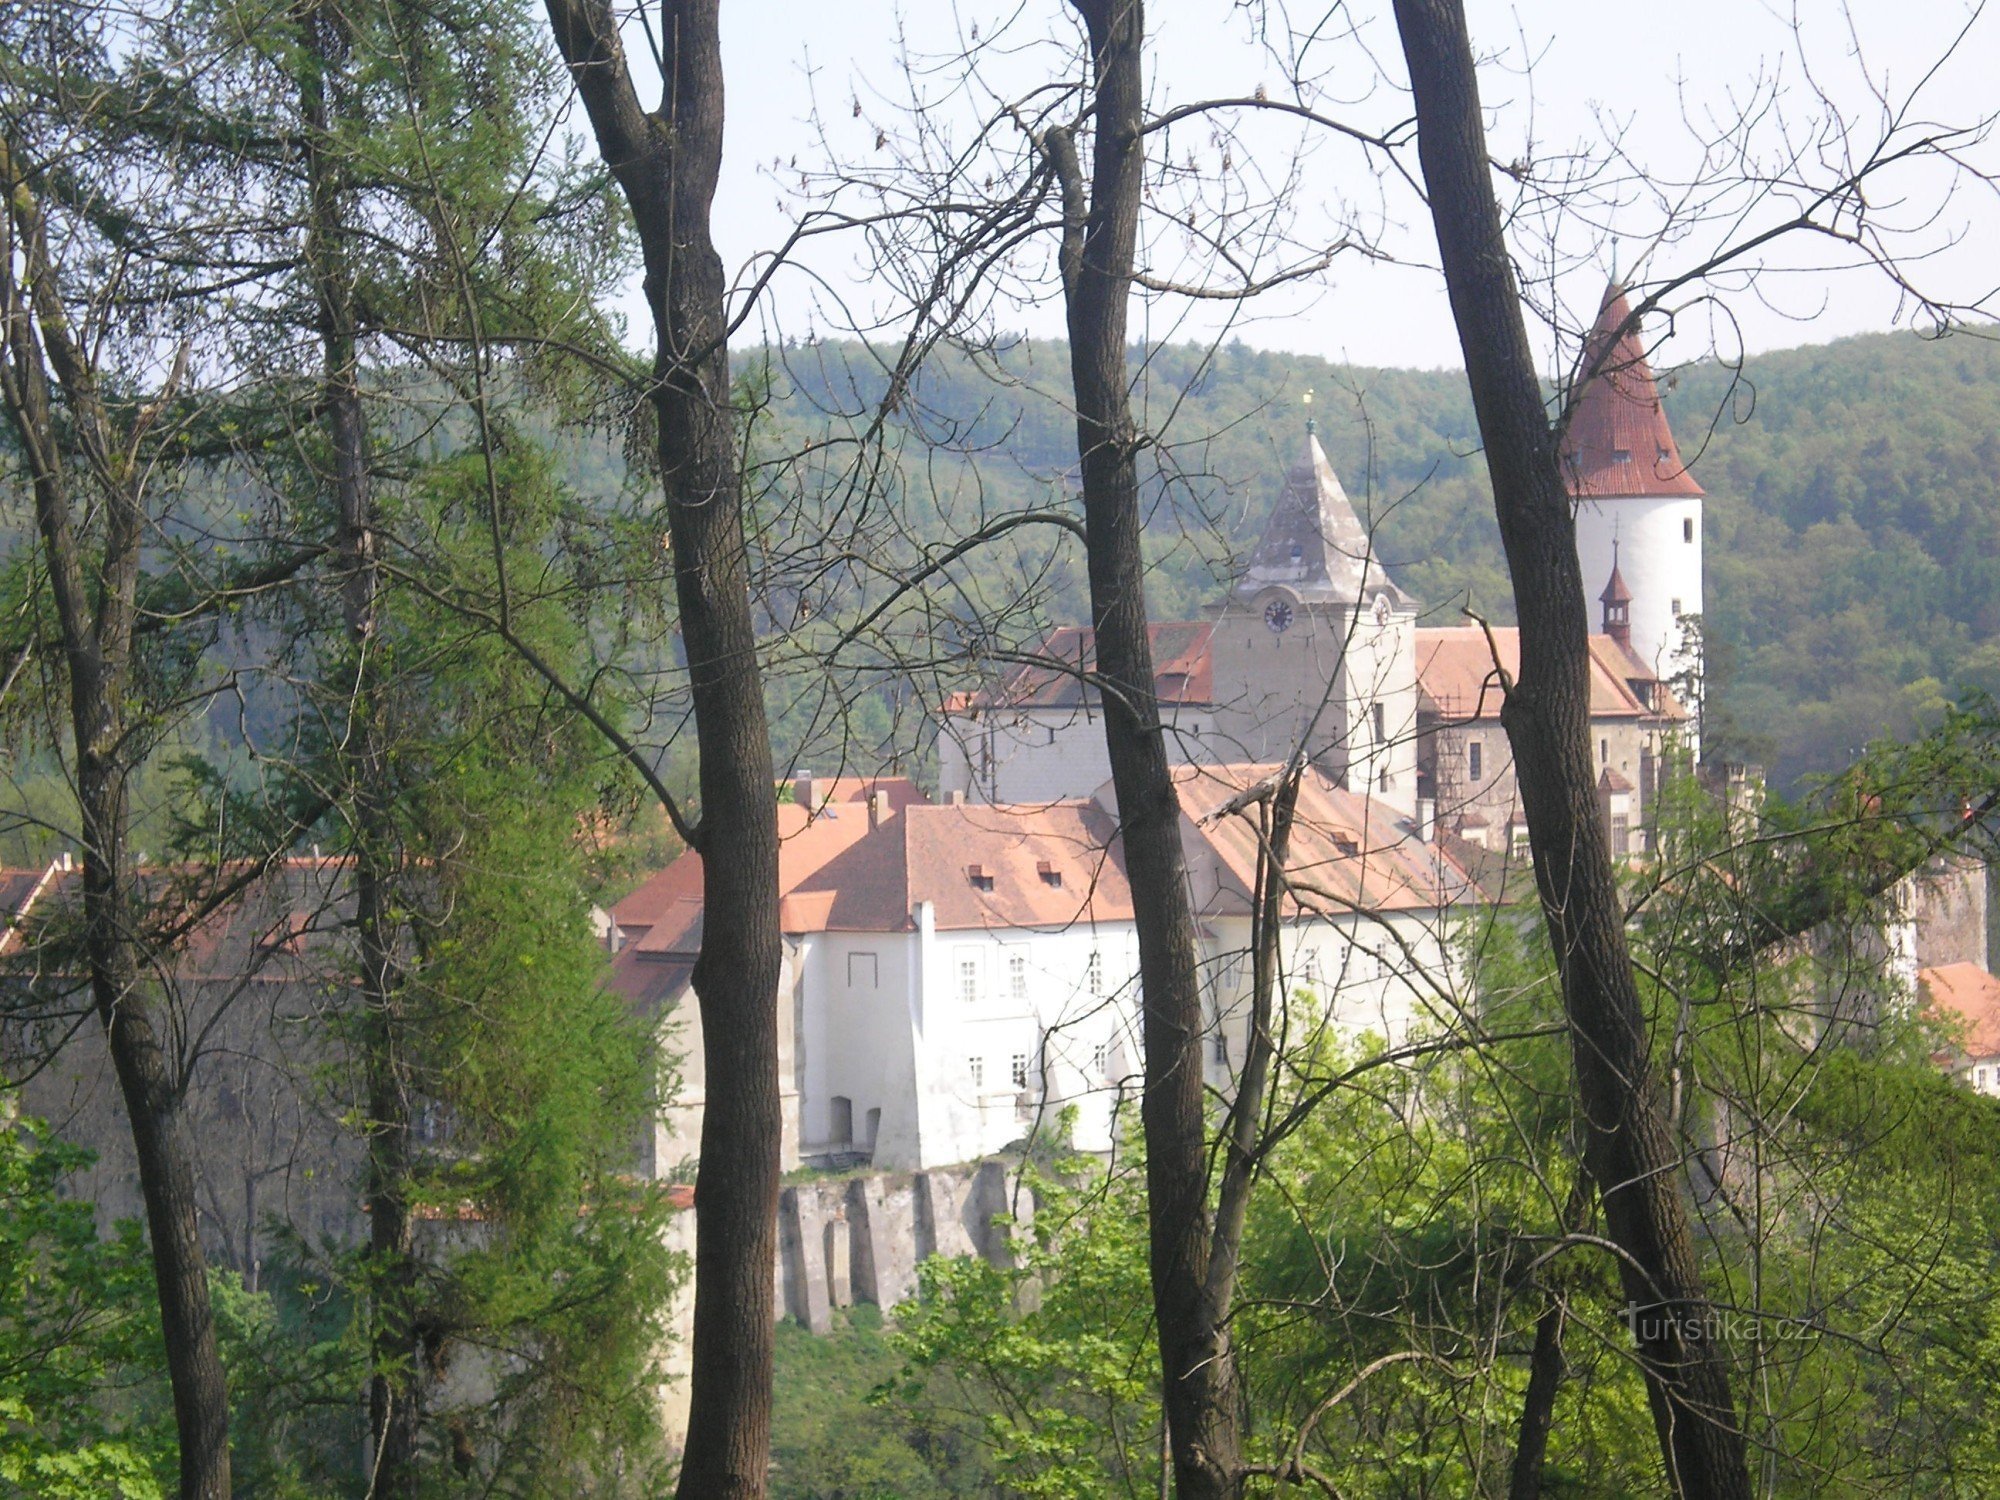 Views of the castle from the road